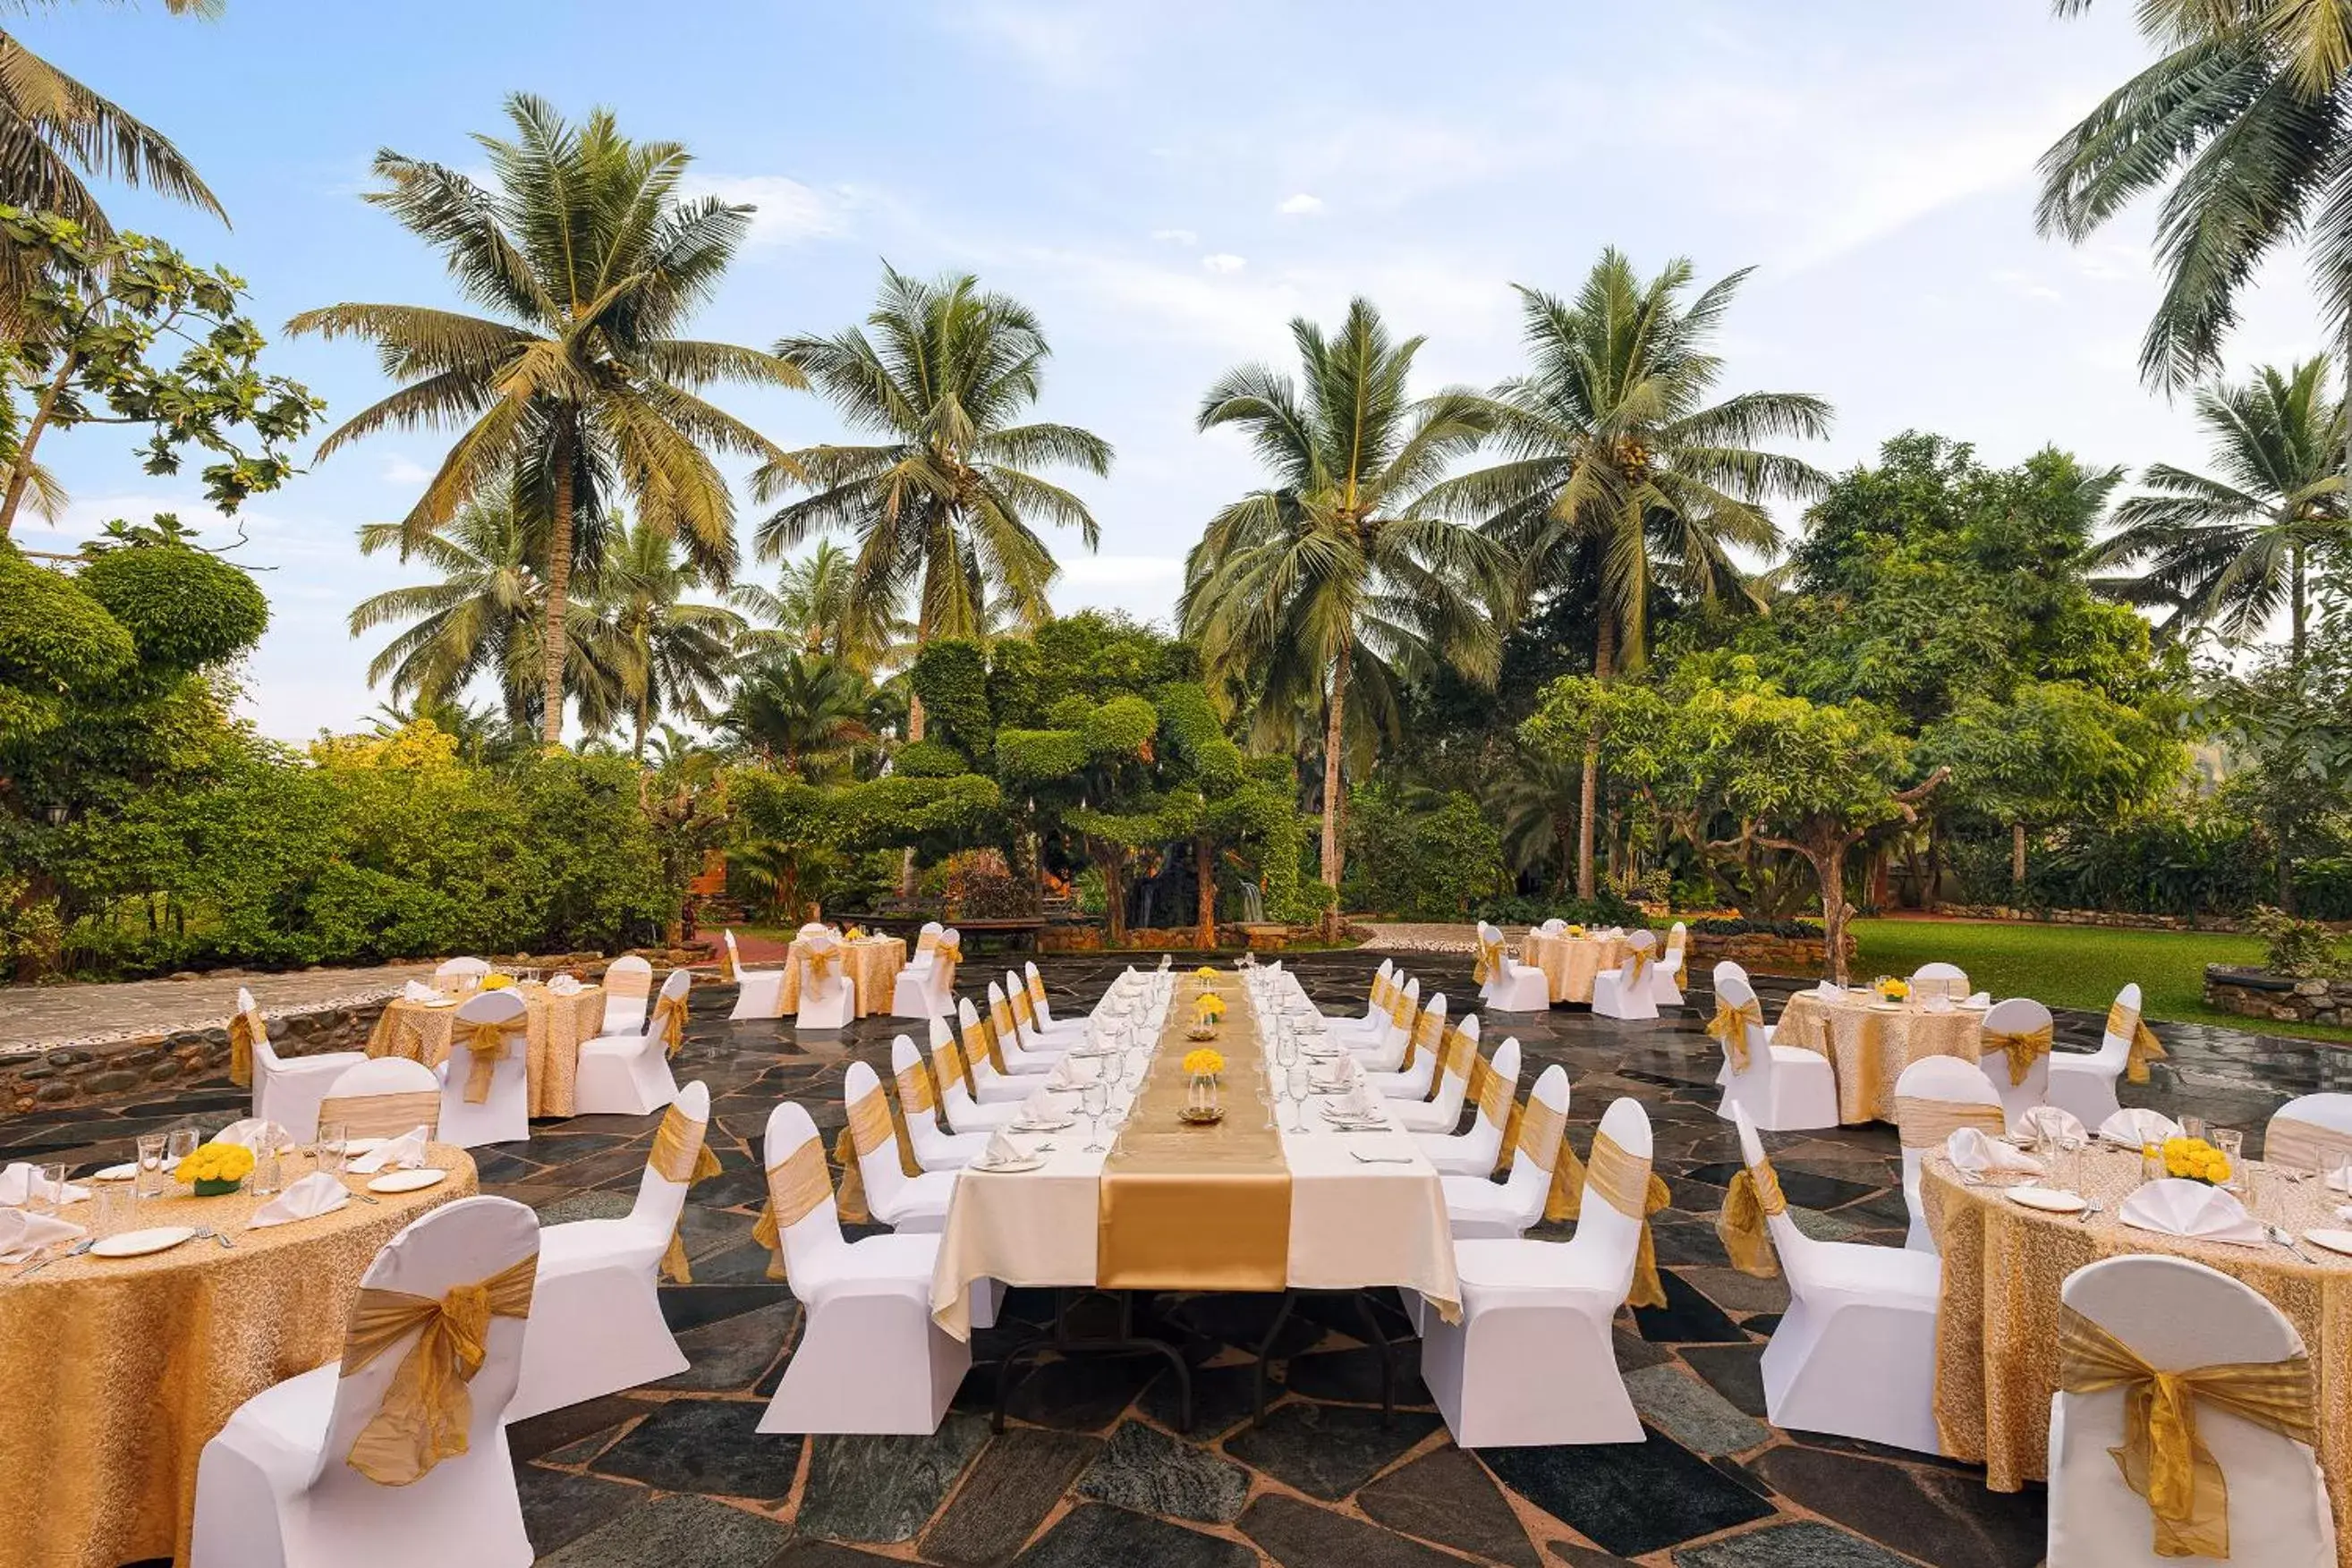 Natural landscape, Banquet Facilities in Fortune Resort Benaulim, Goa - Member ITC's Hotel Group